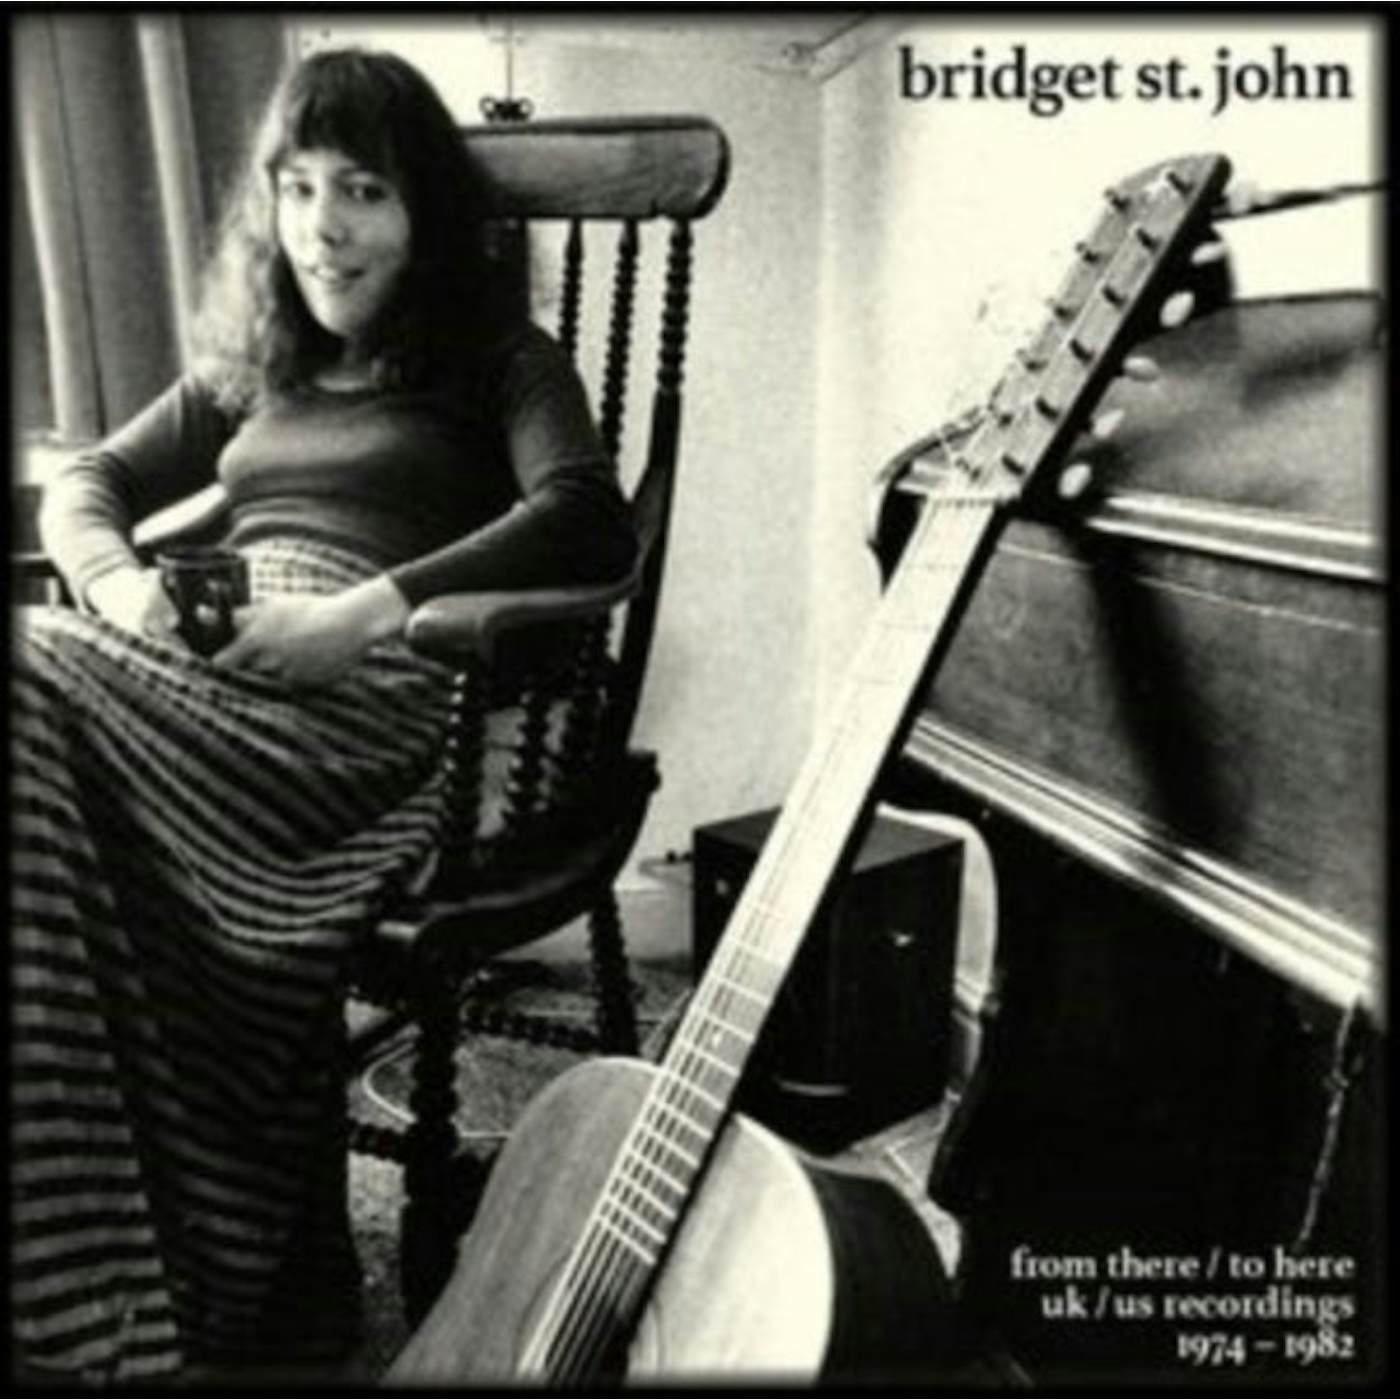 Bridget St John CD - From There / To Here